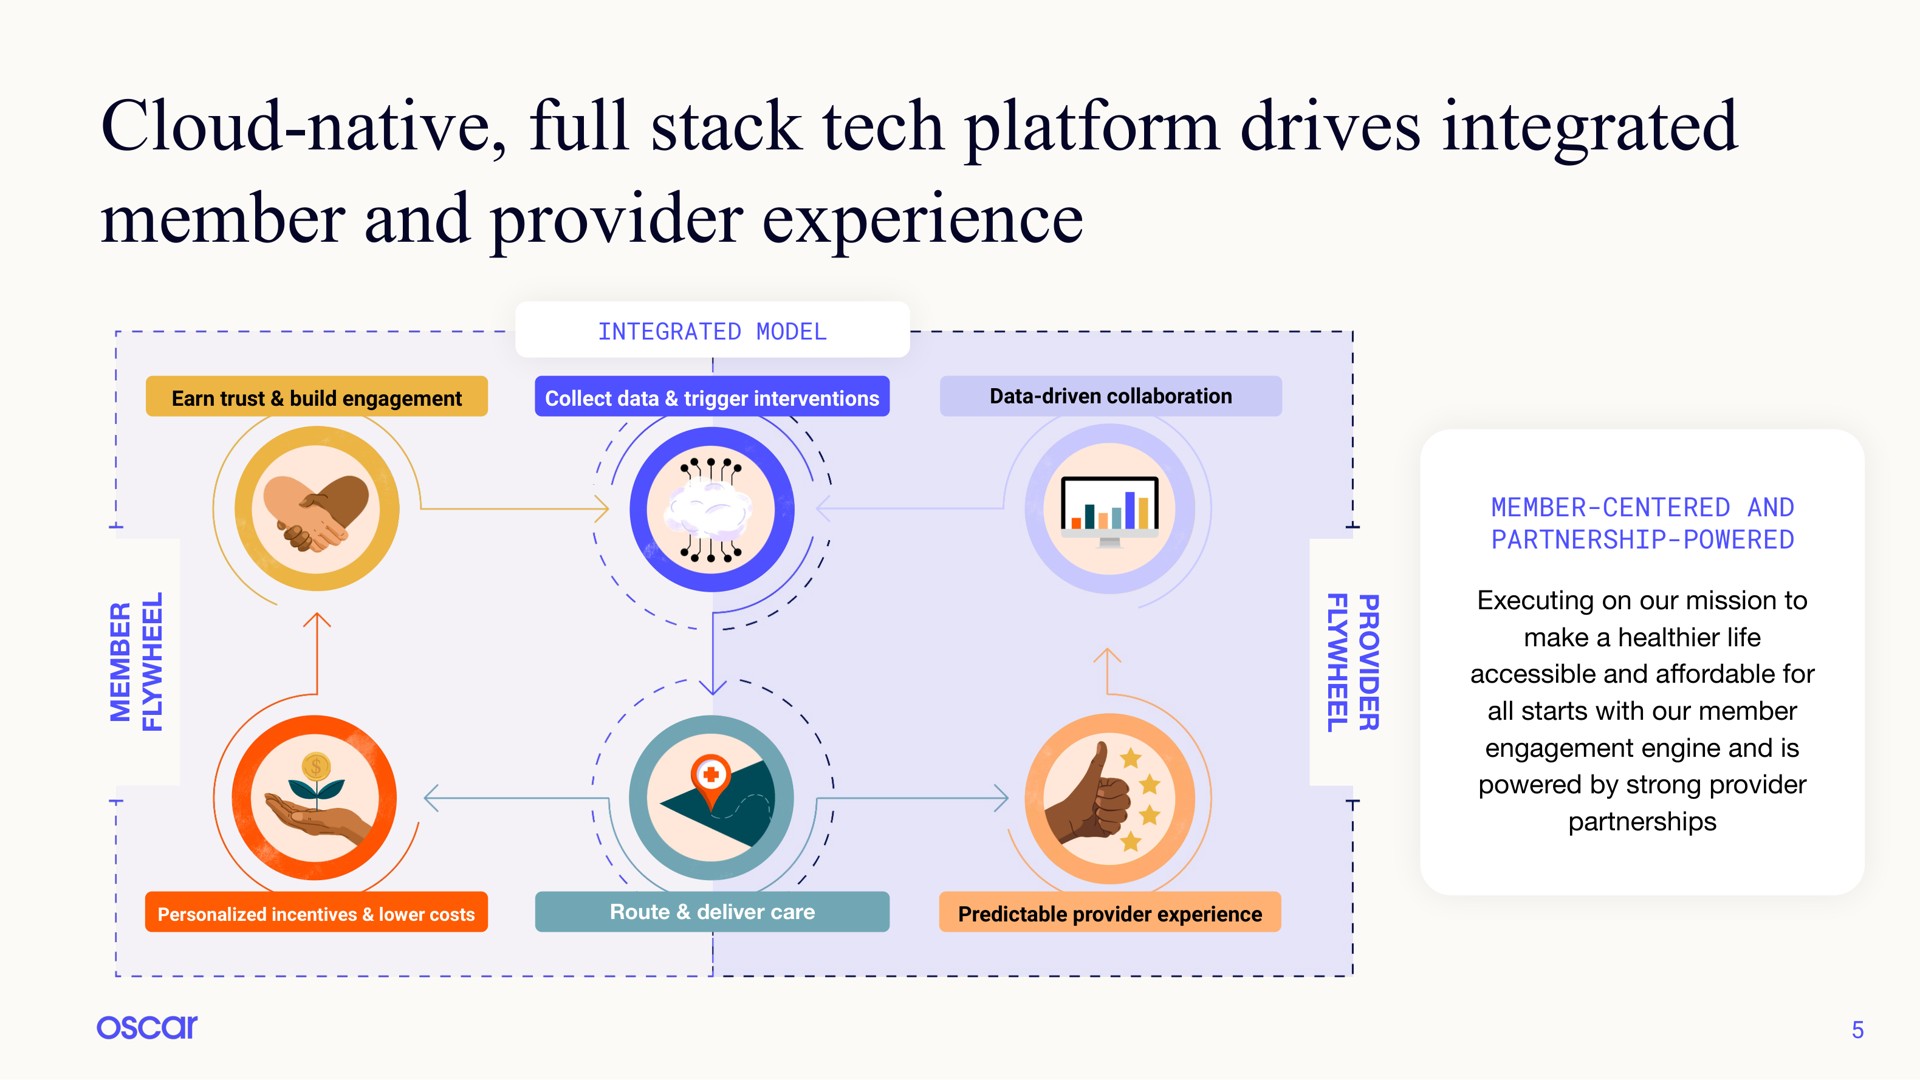 cloud native full stack tech platform drives integrated member and provider experience | Oscar Health